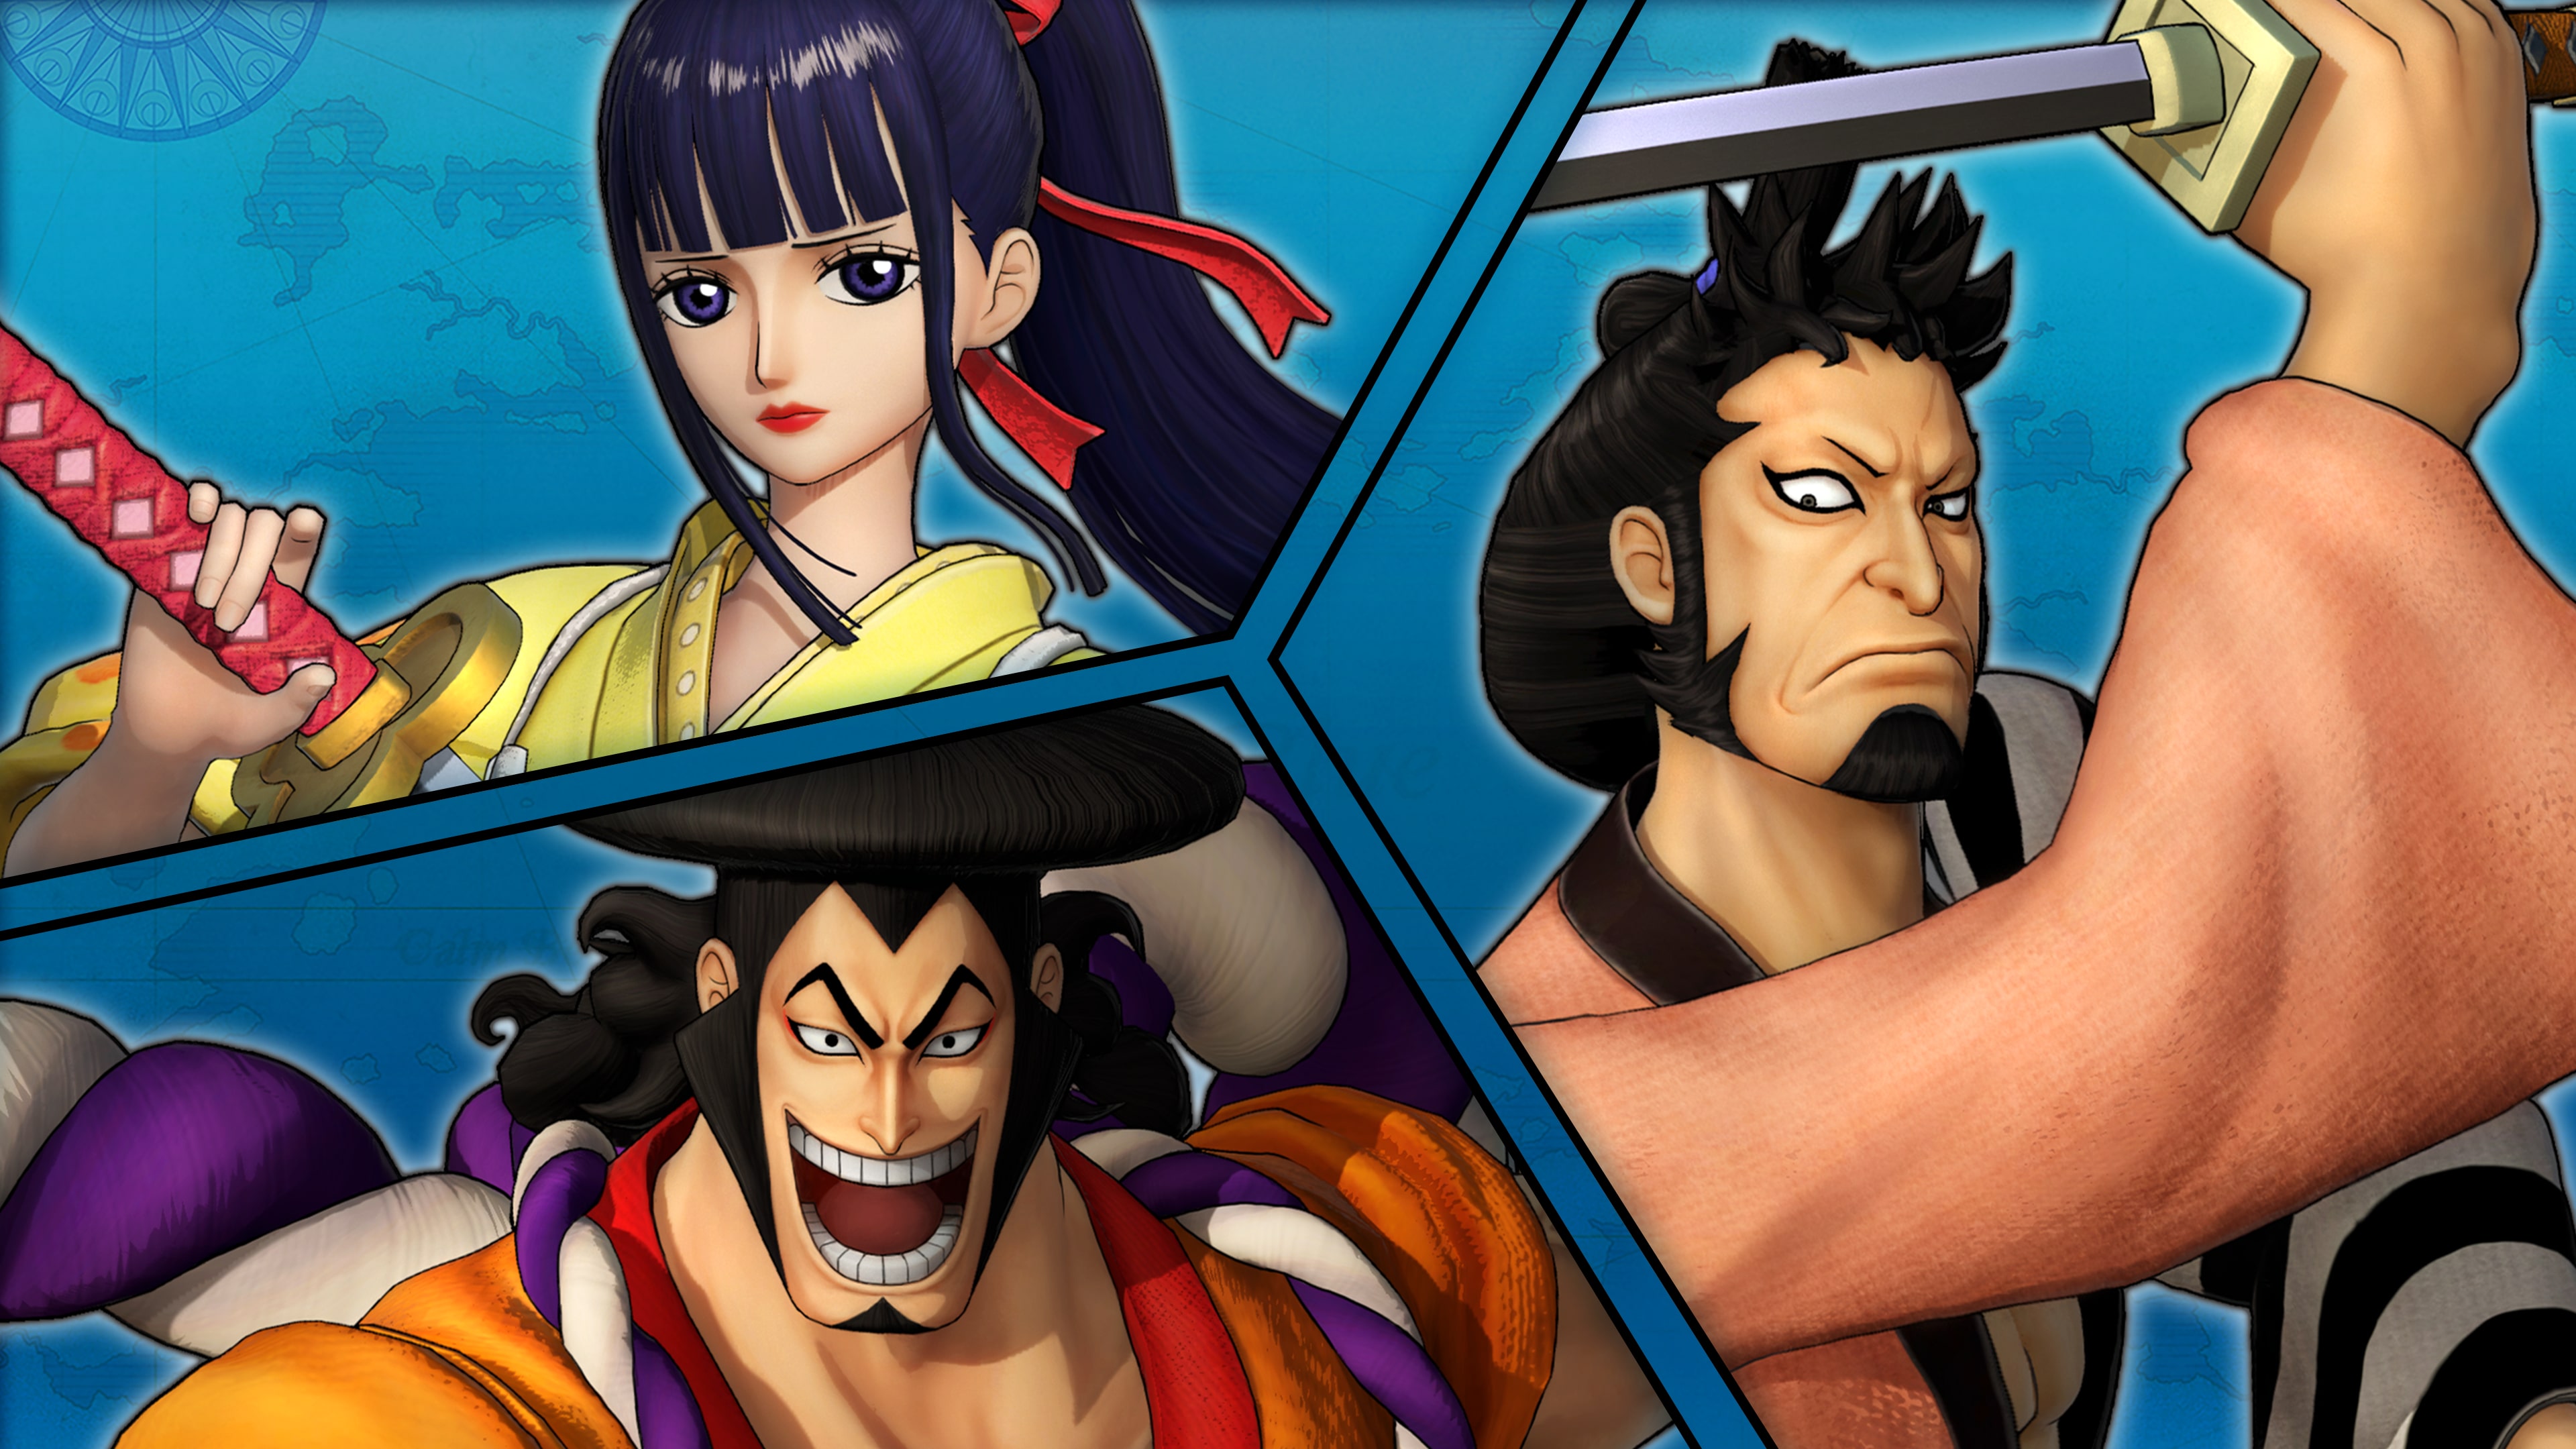 ONE PIECE: PIRATE WARRIORS 4 Land of Wano Pack